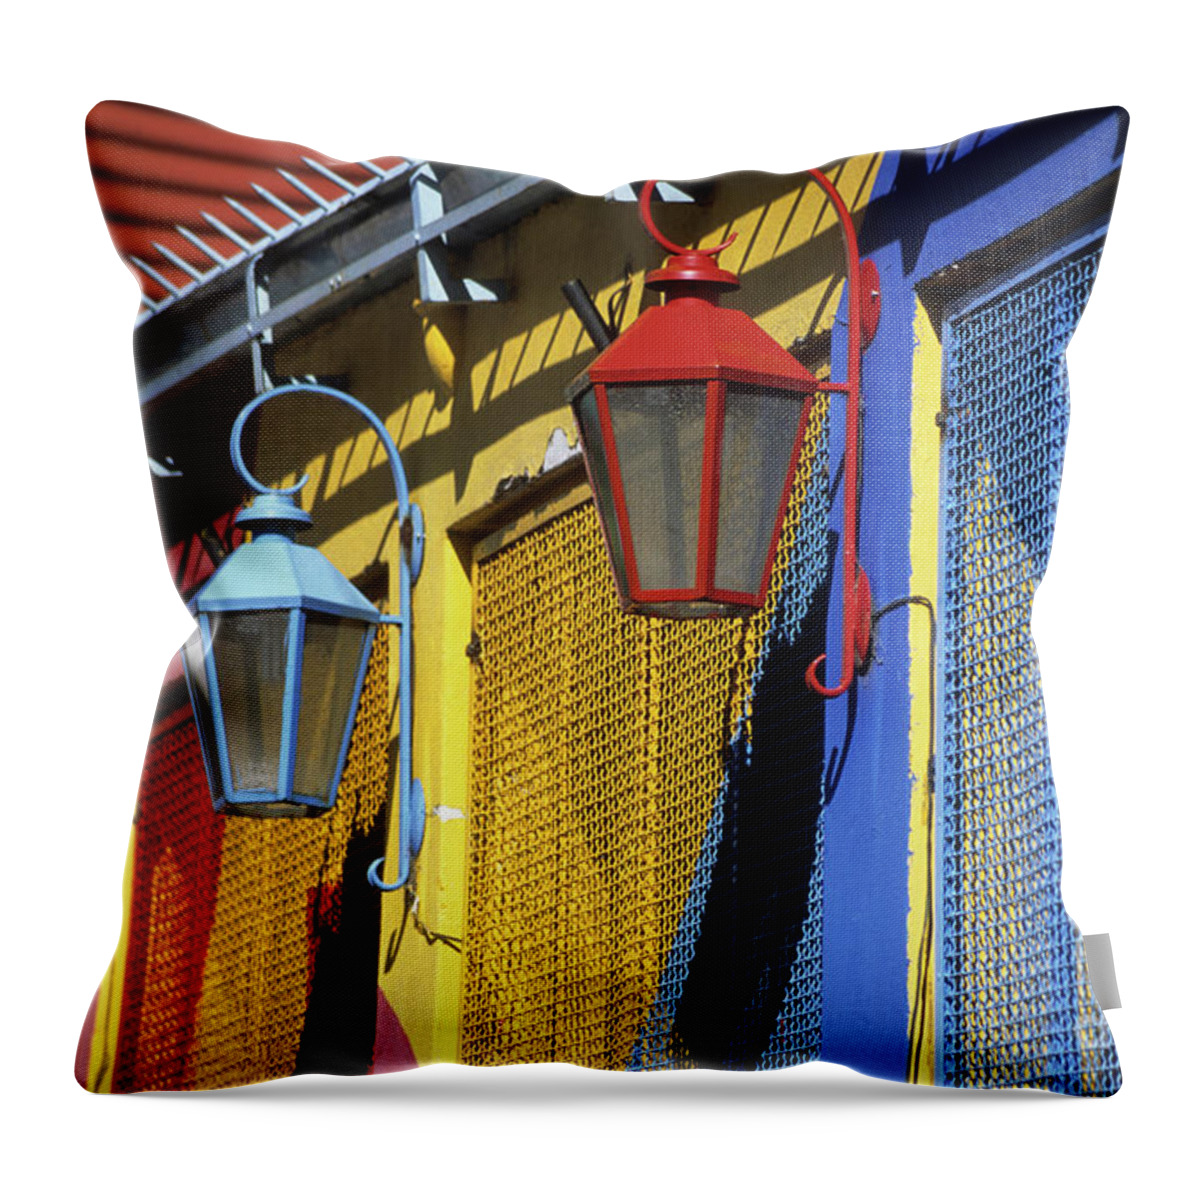 Buenos Aires Throw Pillow featuring the photograph Colourful lamps La Boca Buenos Aires by James Brunker